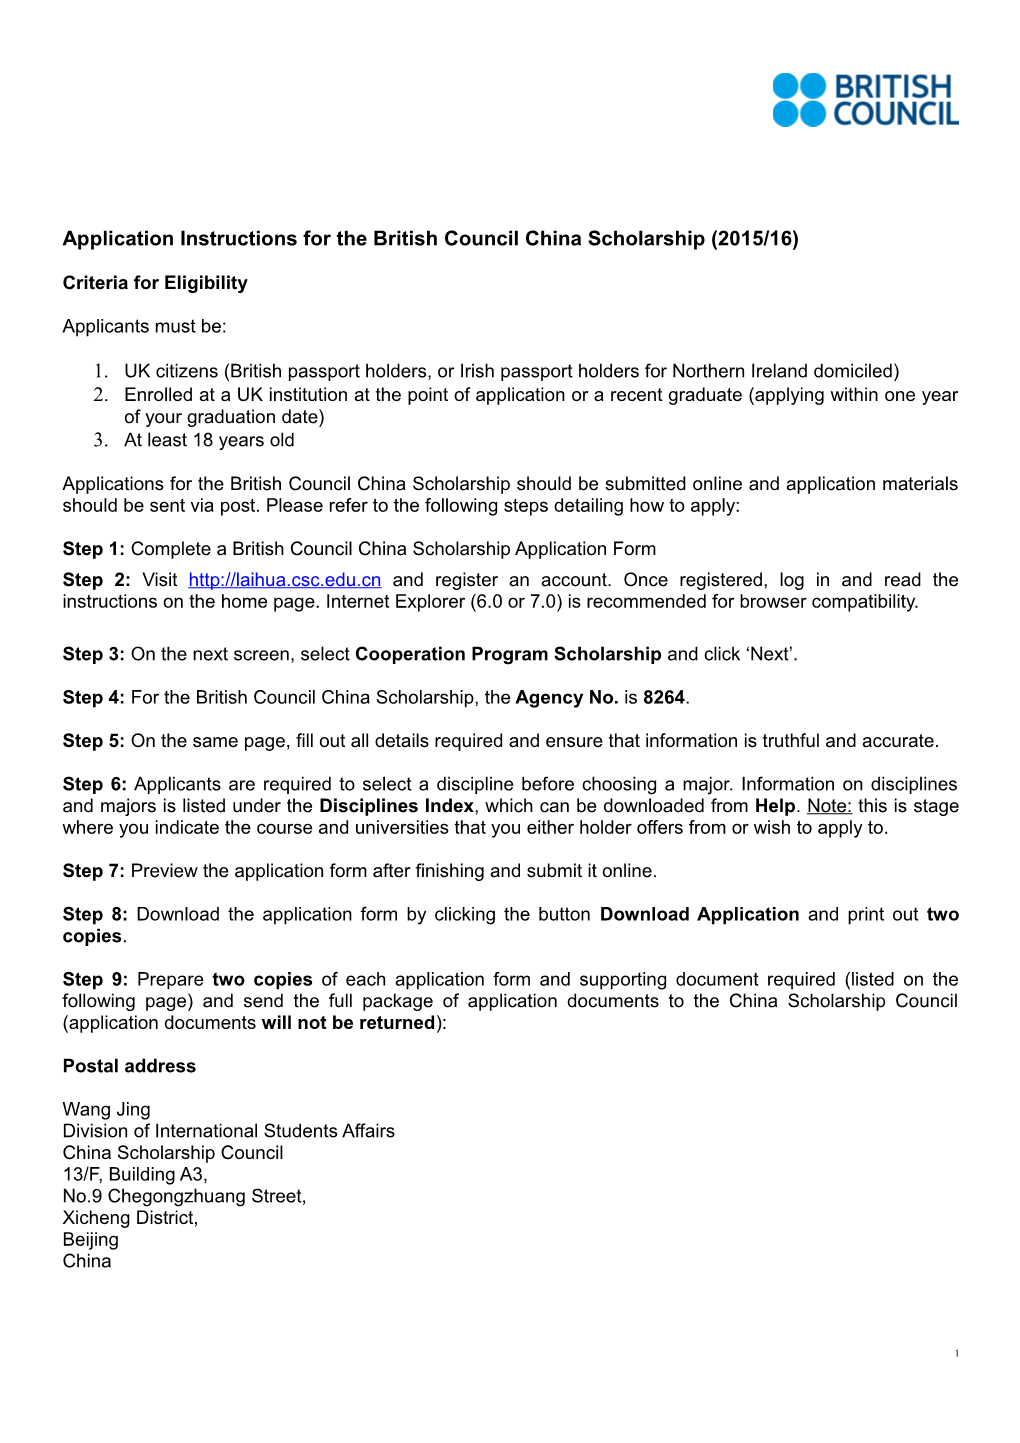 Application Instructions for the British Council China Scholarship (2015/16)